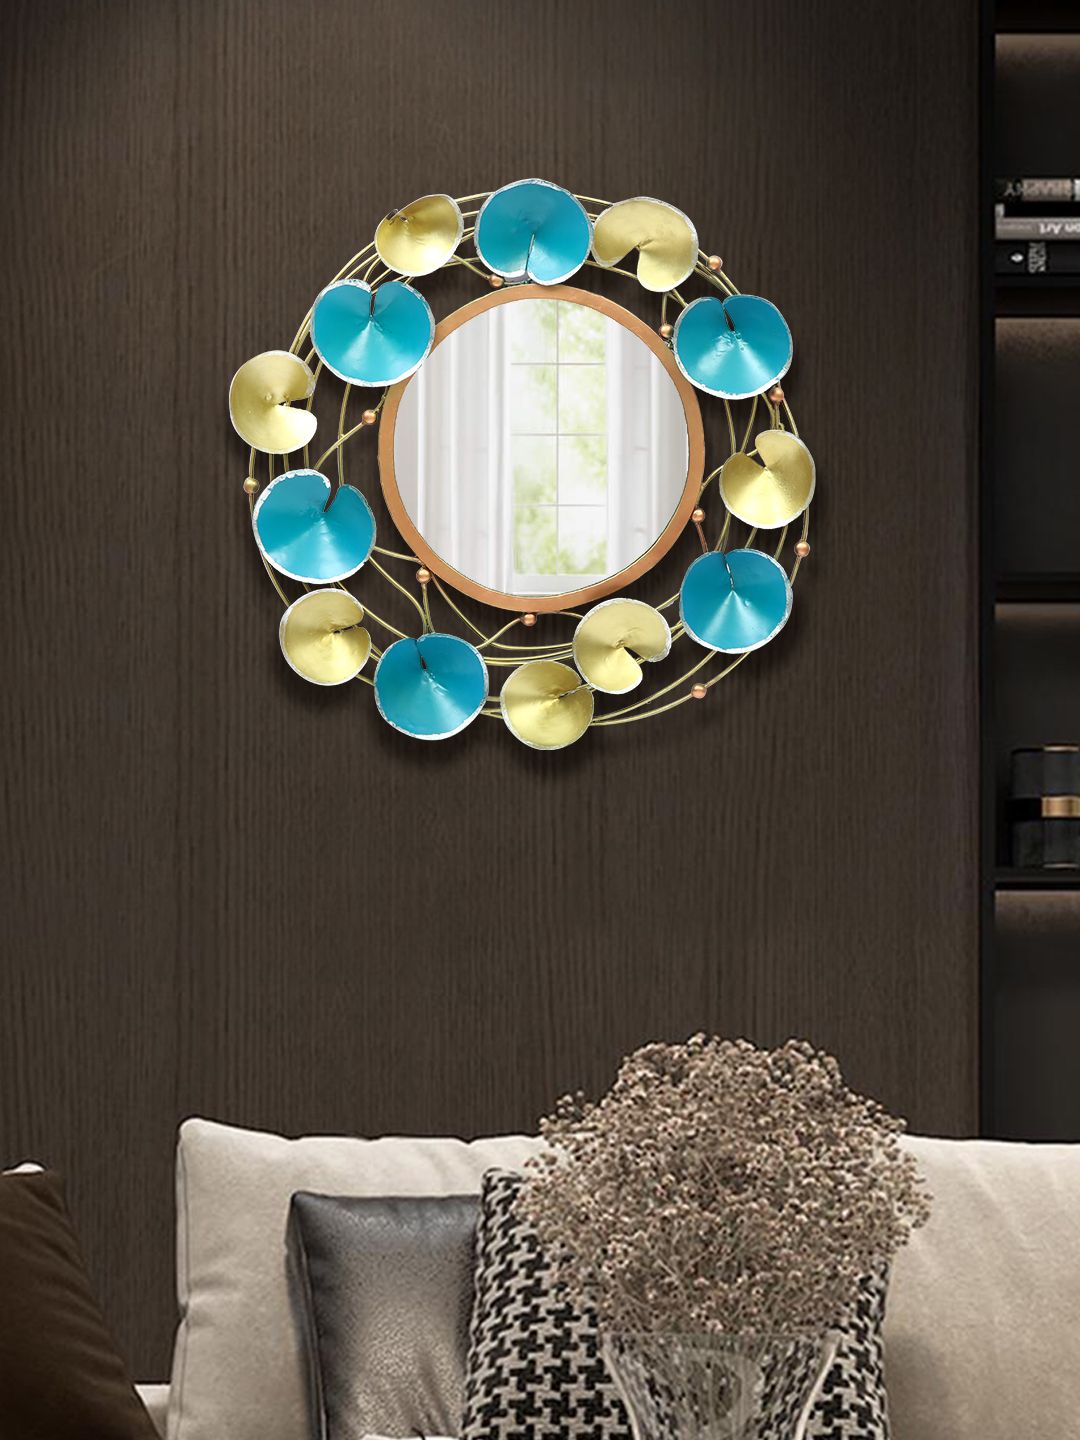 Aapno Rajasthan Gold-Toned & Blue Patterned Wall Mirror Price in India